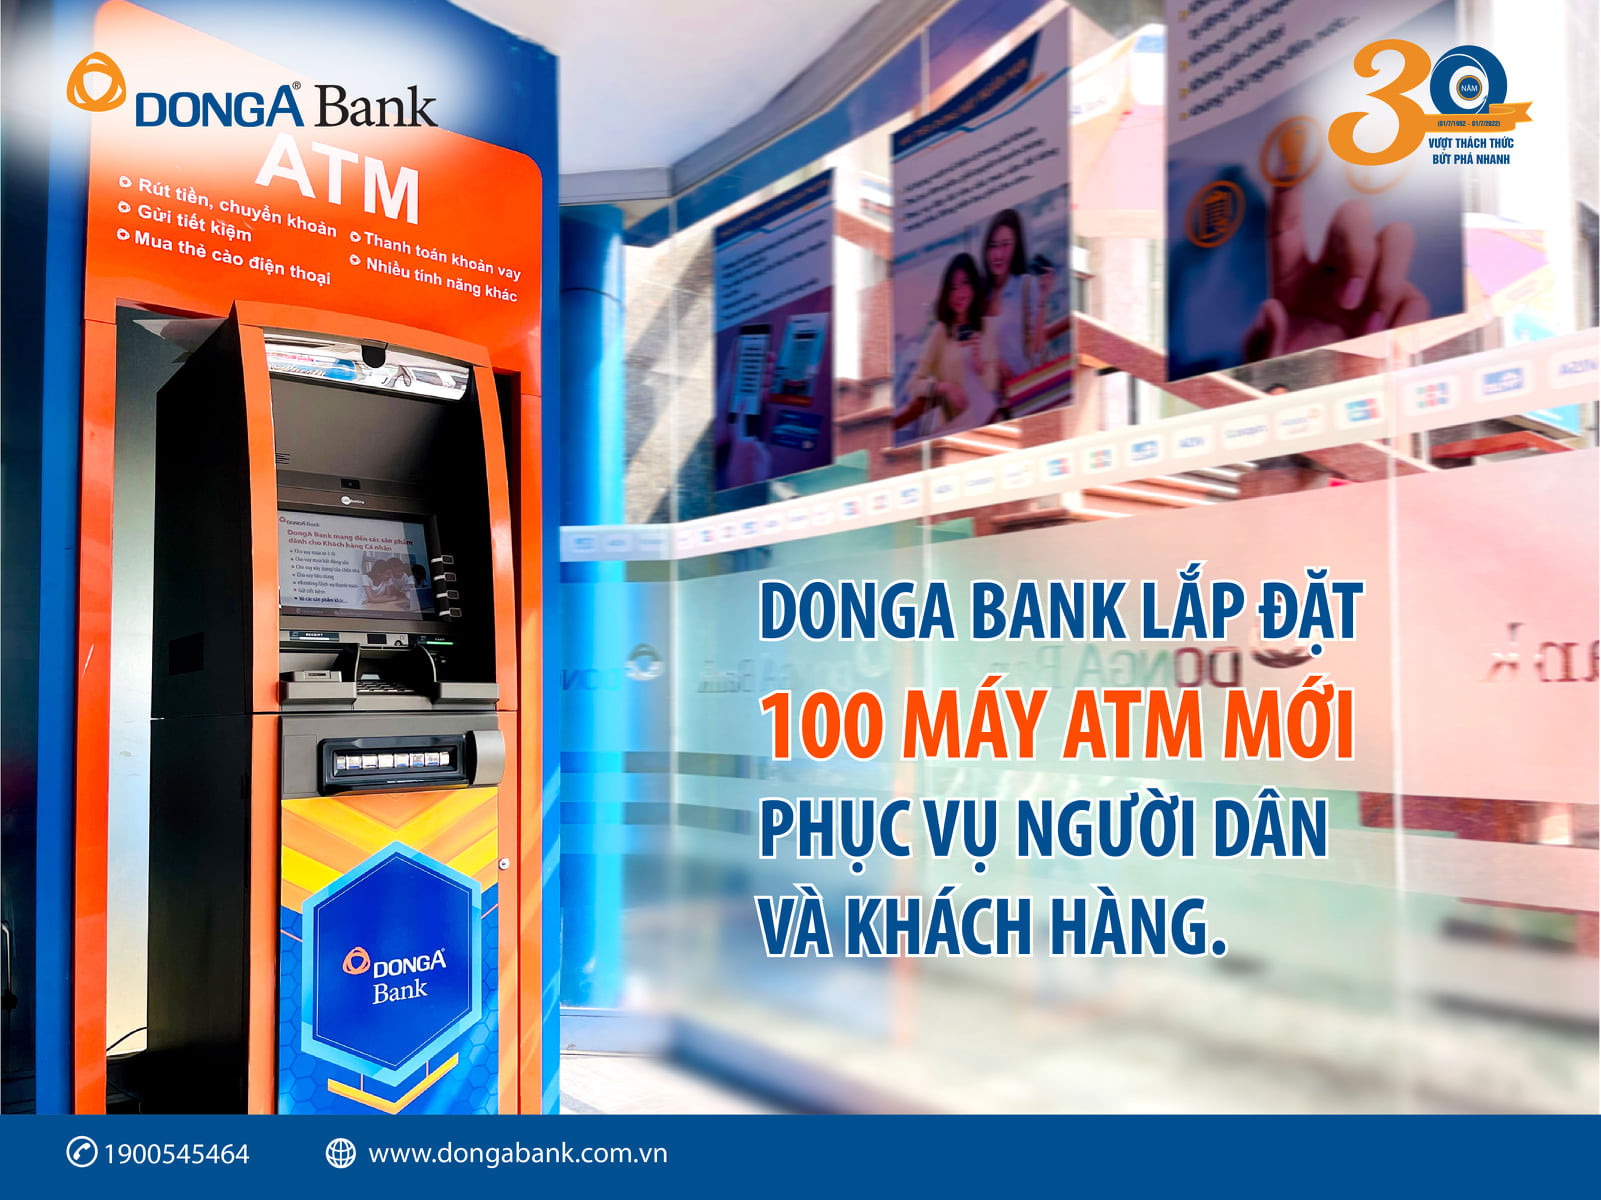 100 New Generation Automated Teller Machines For Dong A Bank was completed within 1 month by Sao Bac Dau.